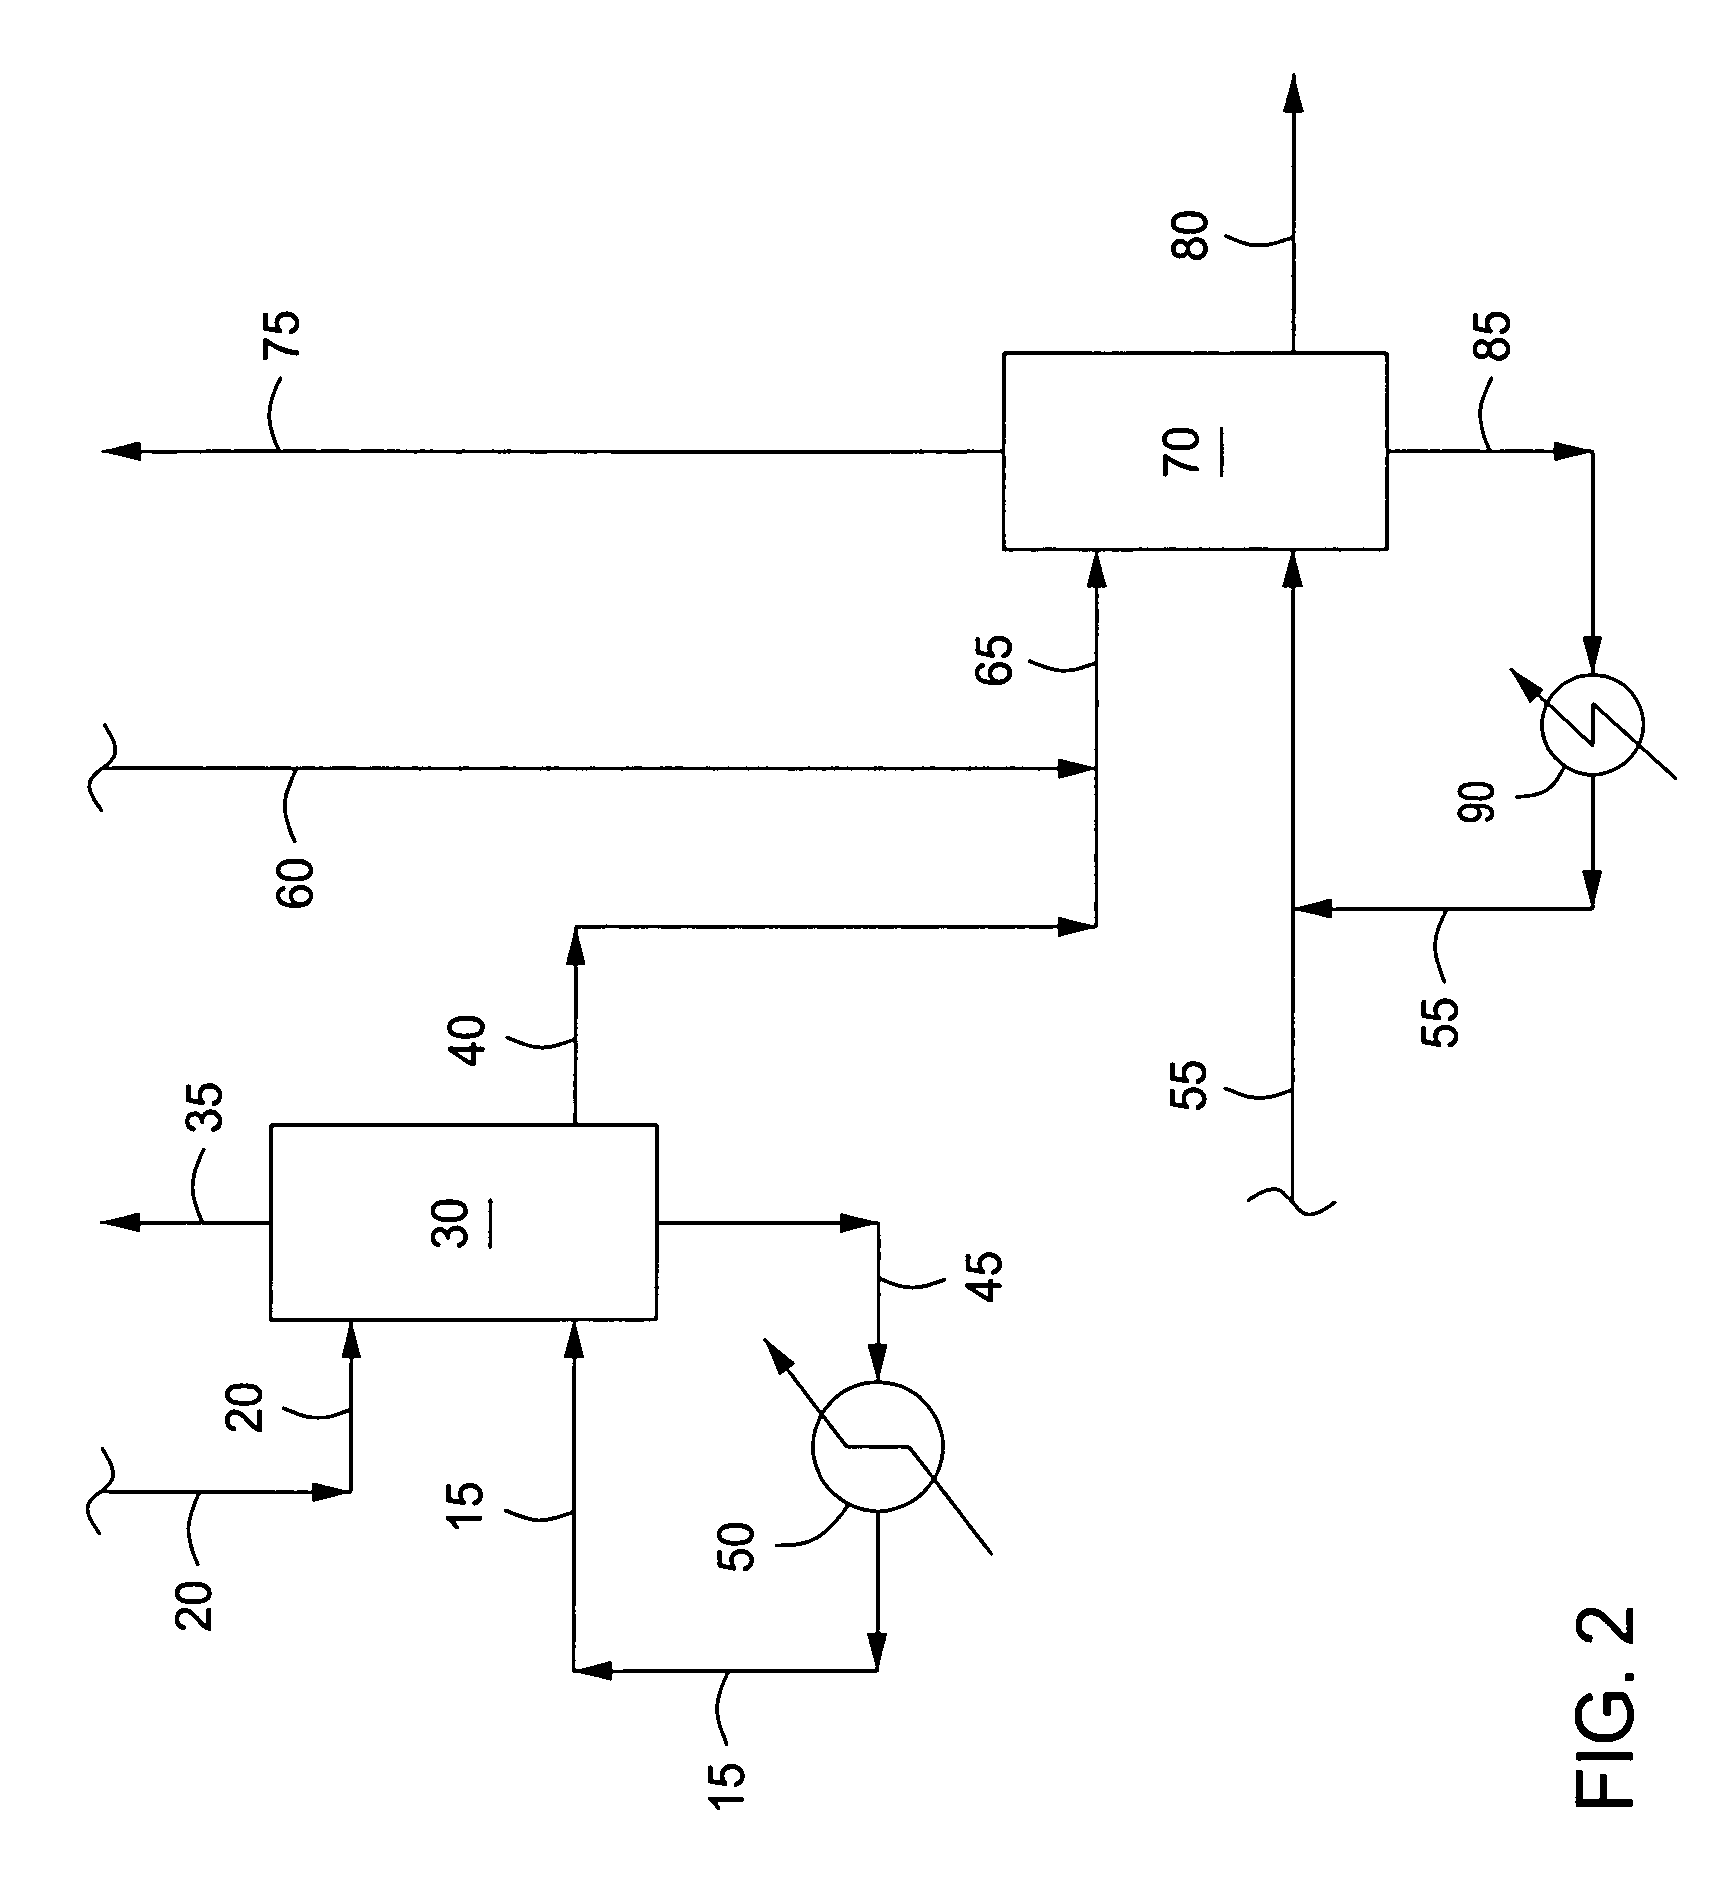 Method for treatment of process waters using steam